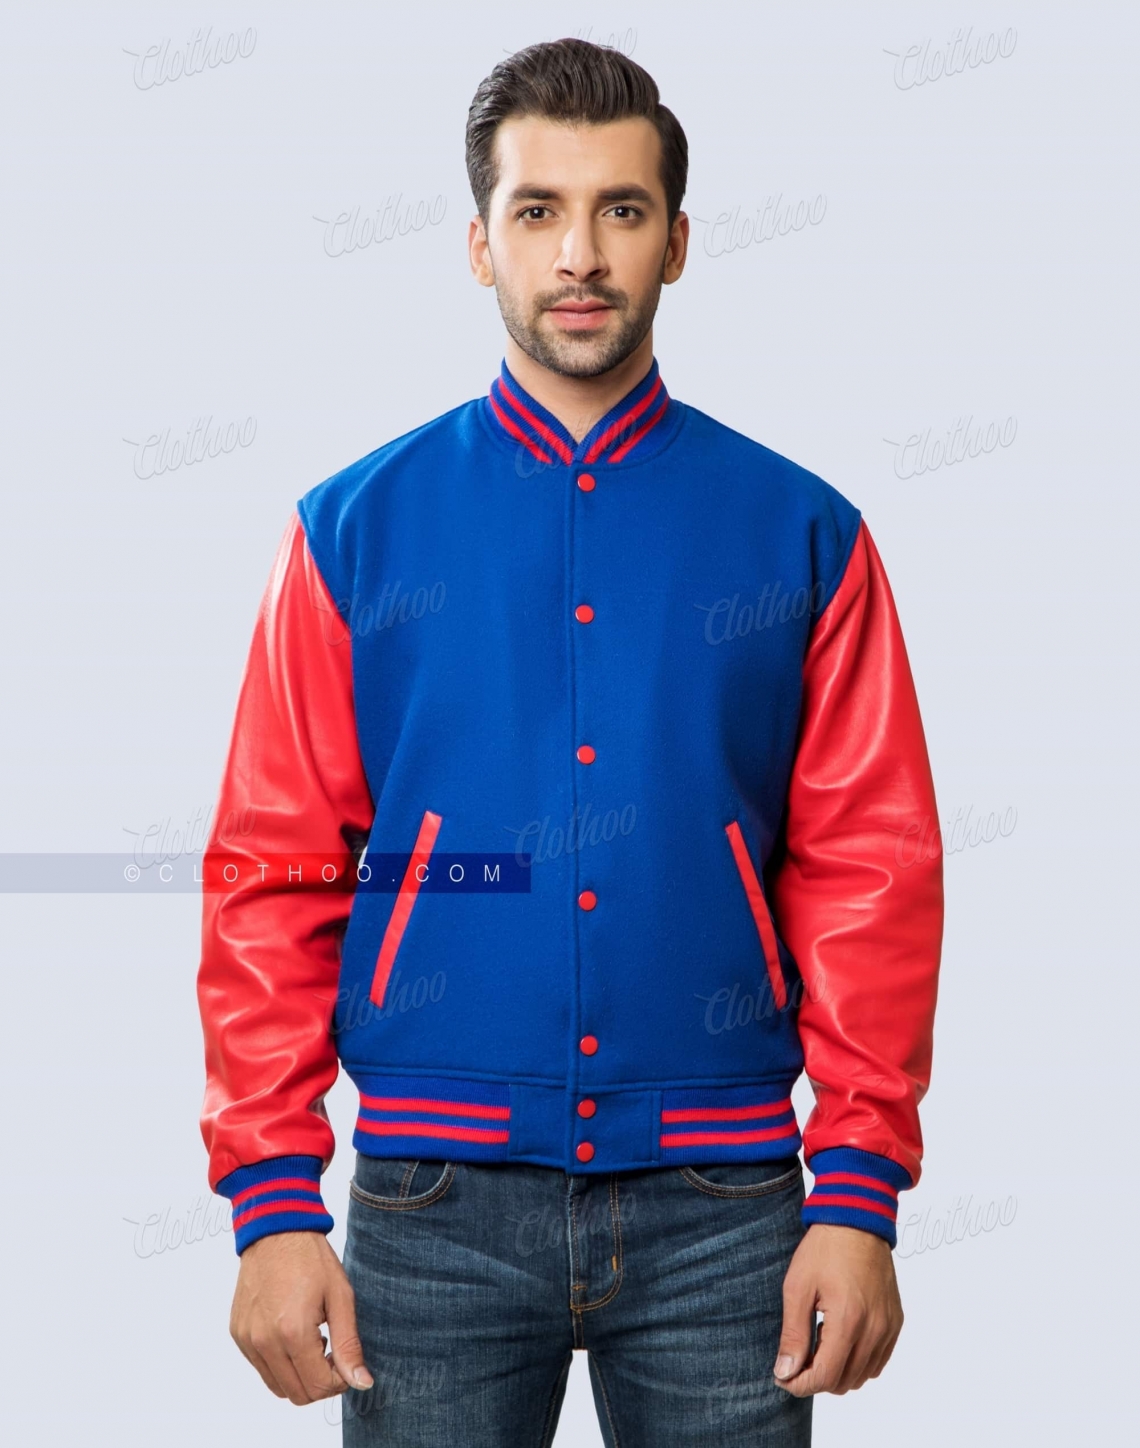 Royal Blue Wool Body and Red Sheepskin Leather Sleeves Letterman Jacket